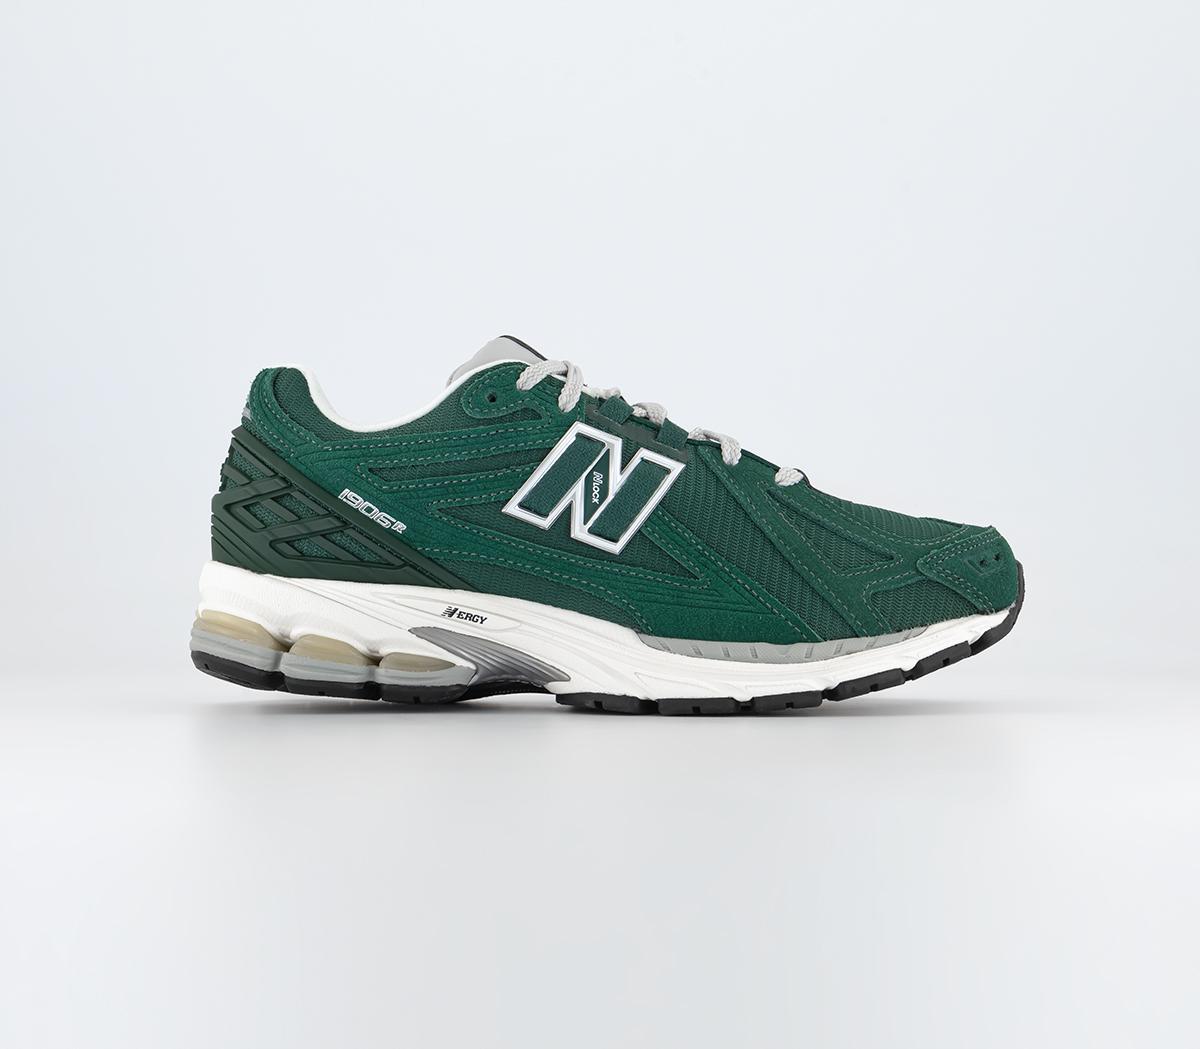 New Balance 1906 Trainers Nightwatch Green - Men's Trainers